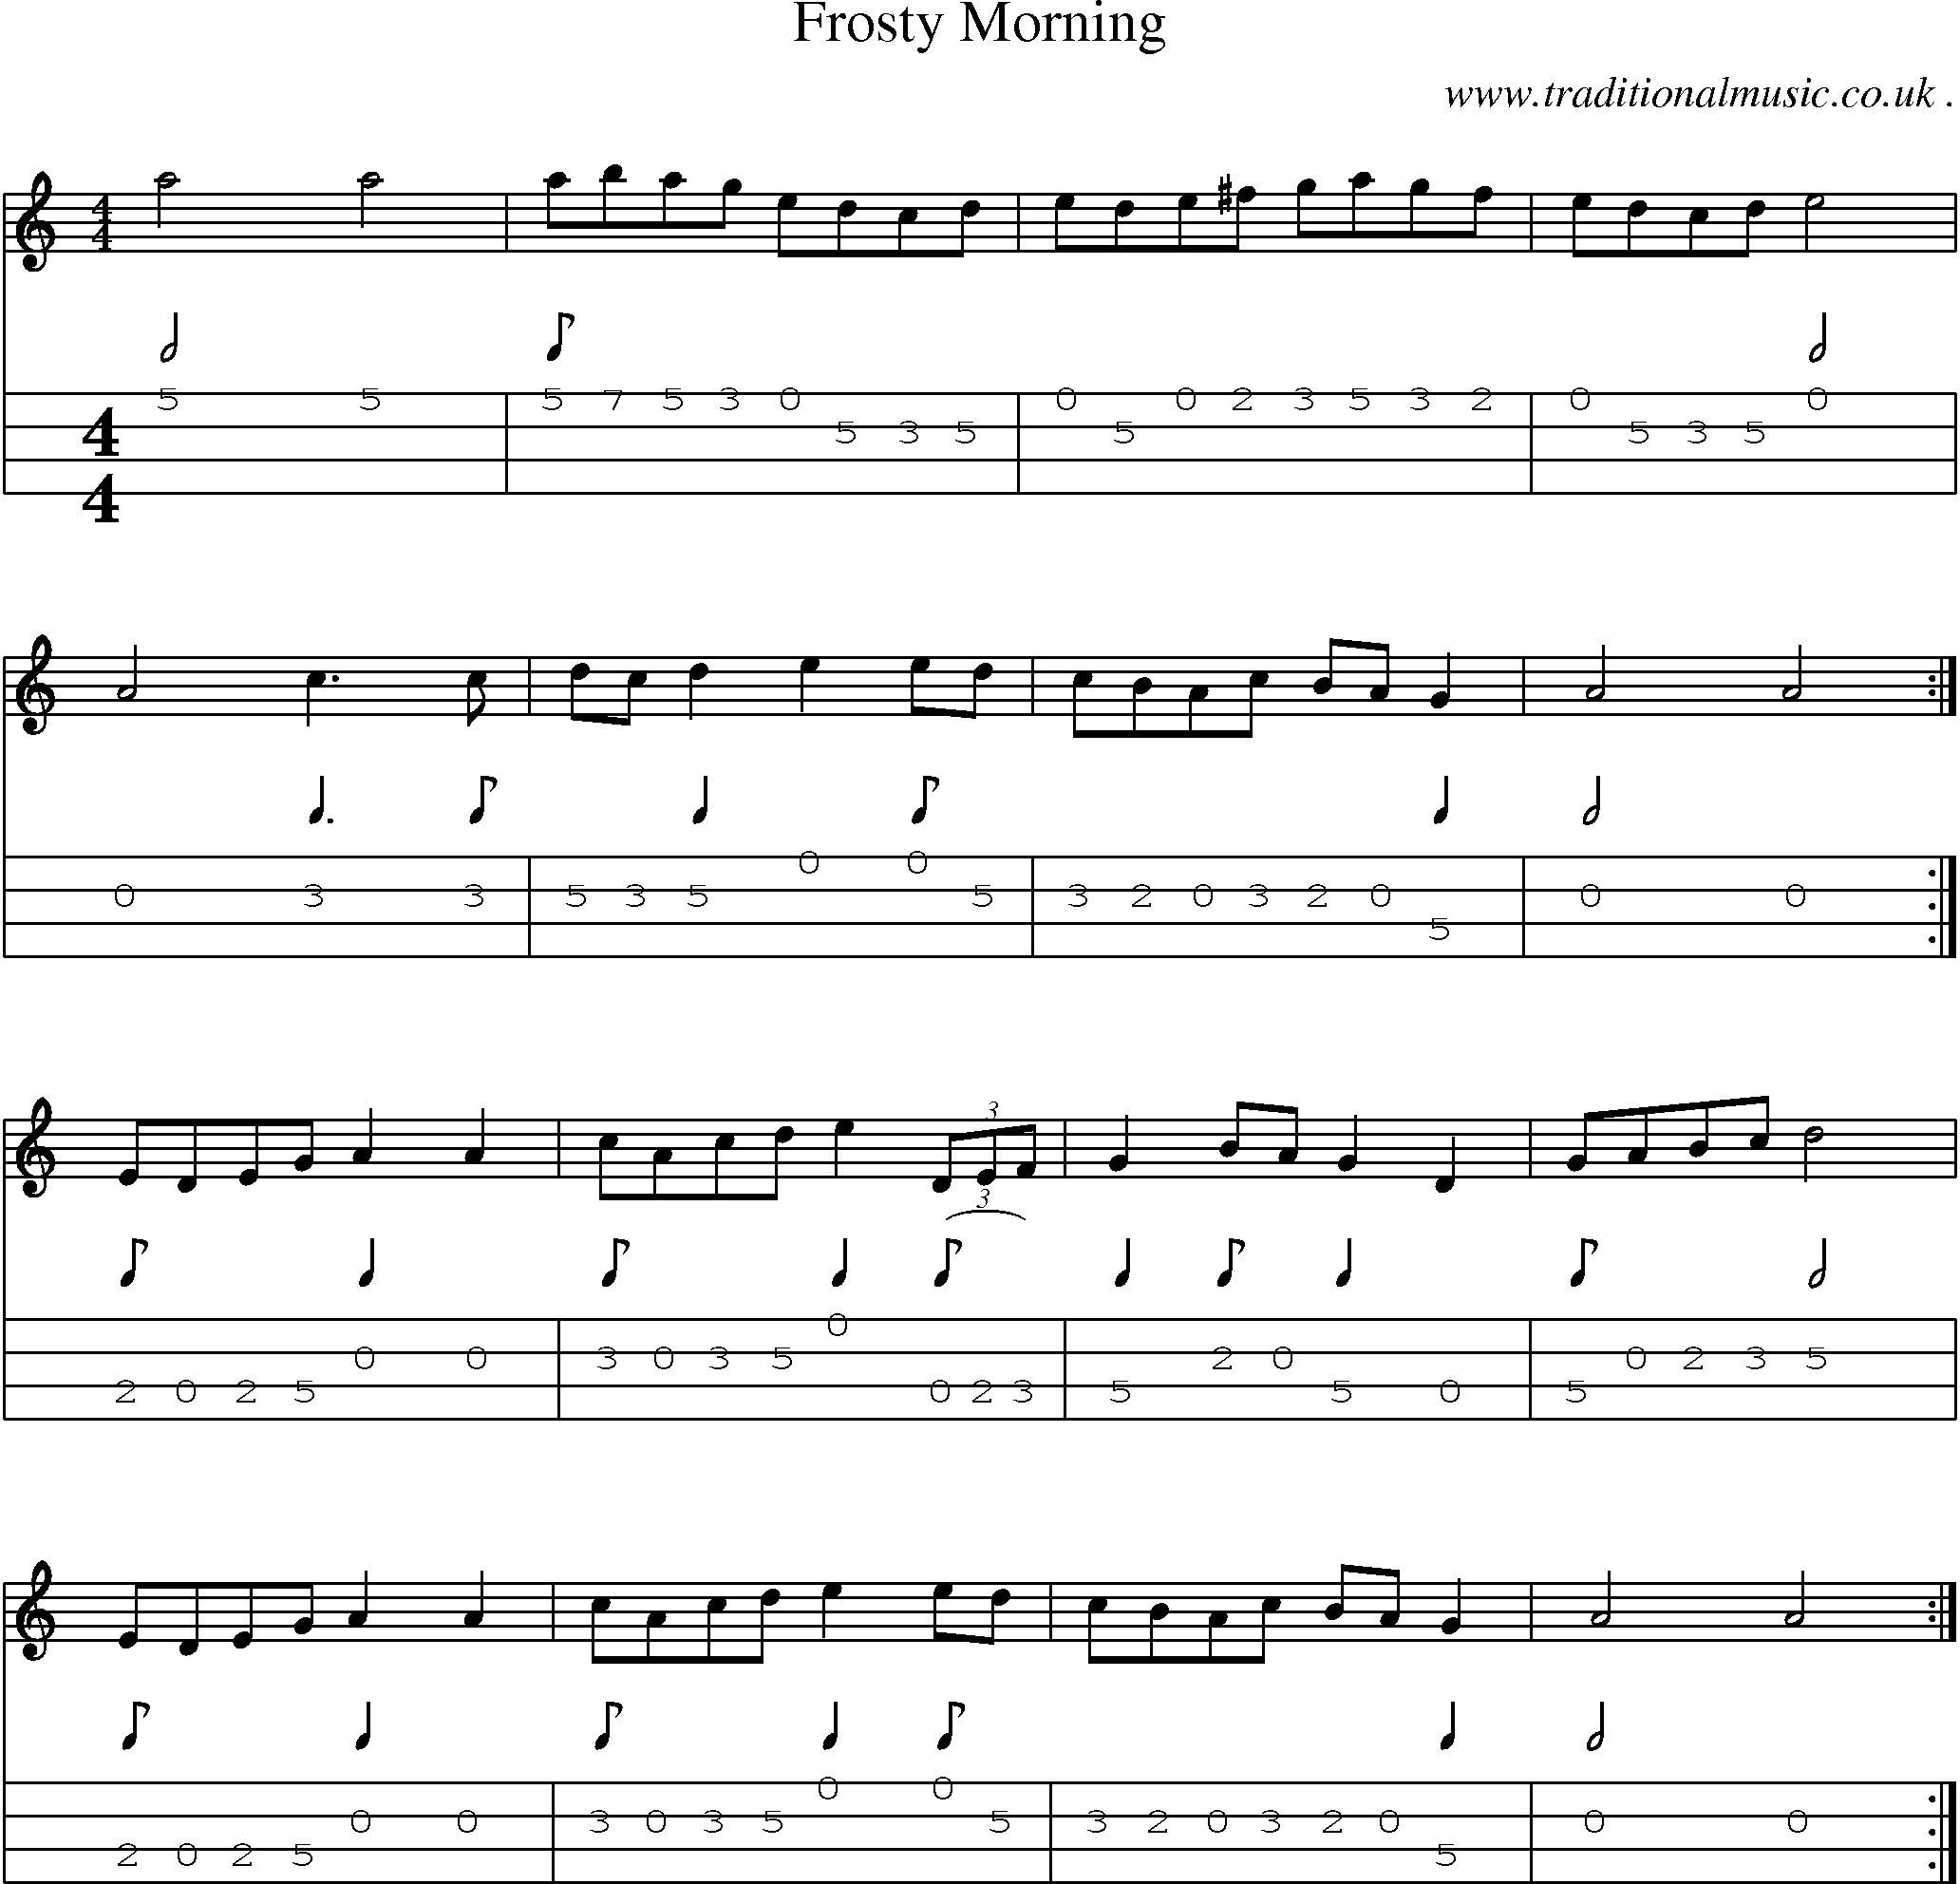 Music Score and Guitar Tabs for Frosty Morning